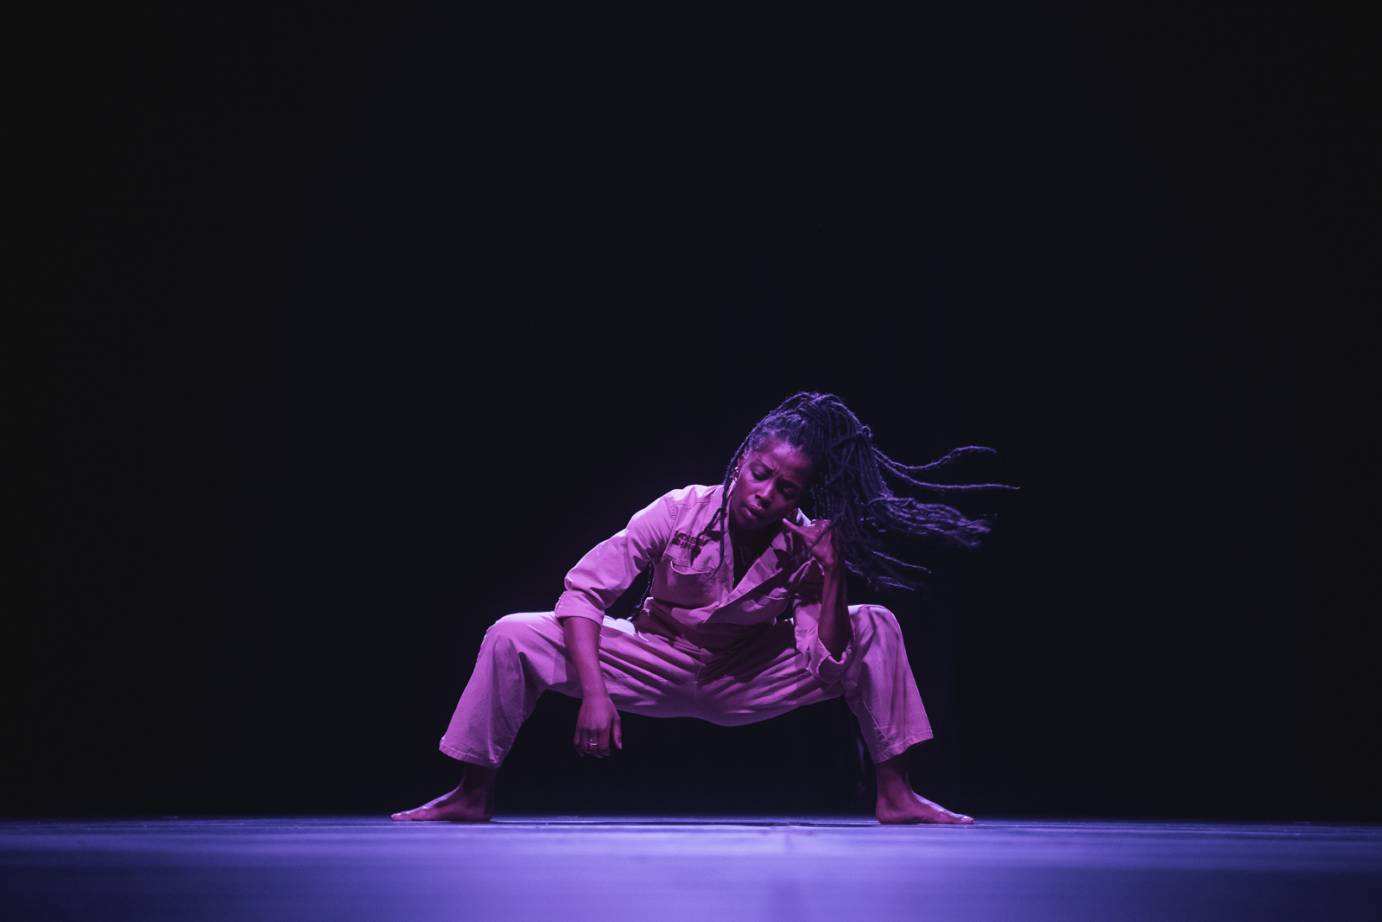 a black woman with long dreads faces us. Her legs are spread wide and bent in an almost balletic squat. one hand is to her ear as if she is talking on the phone